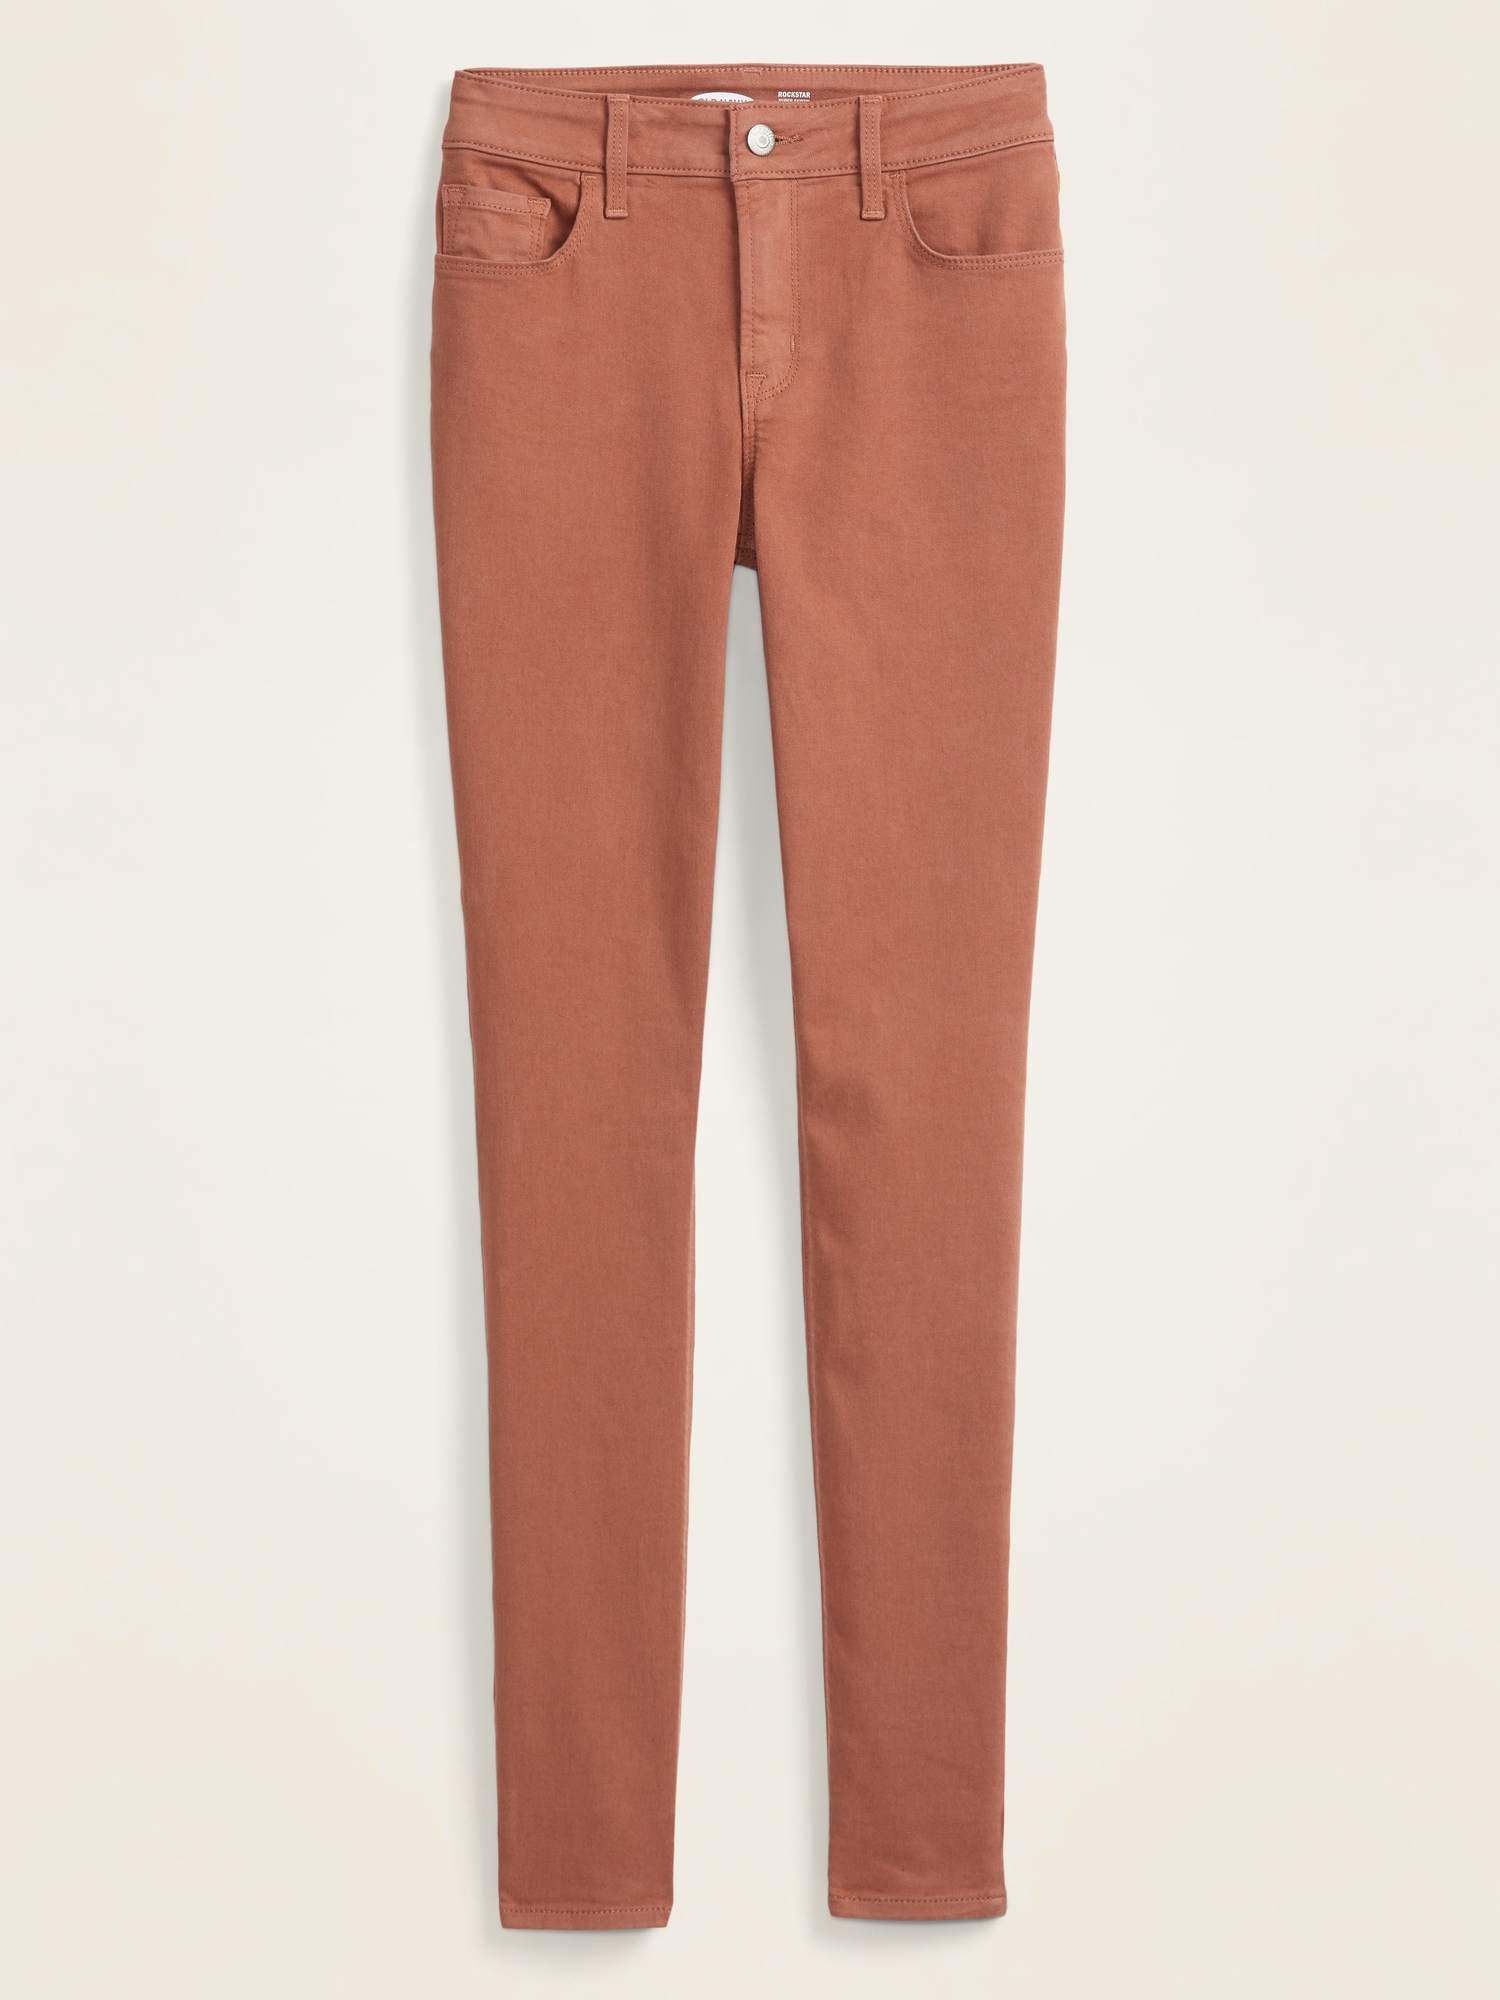 mid rise colored jeans